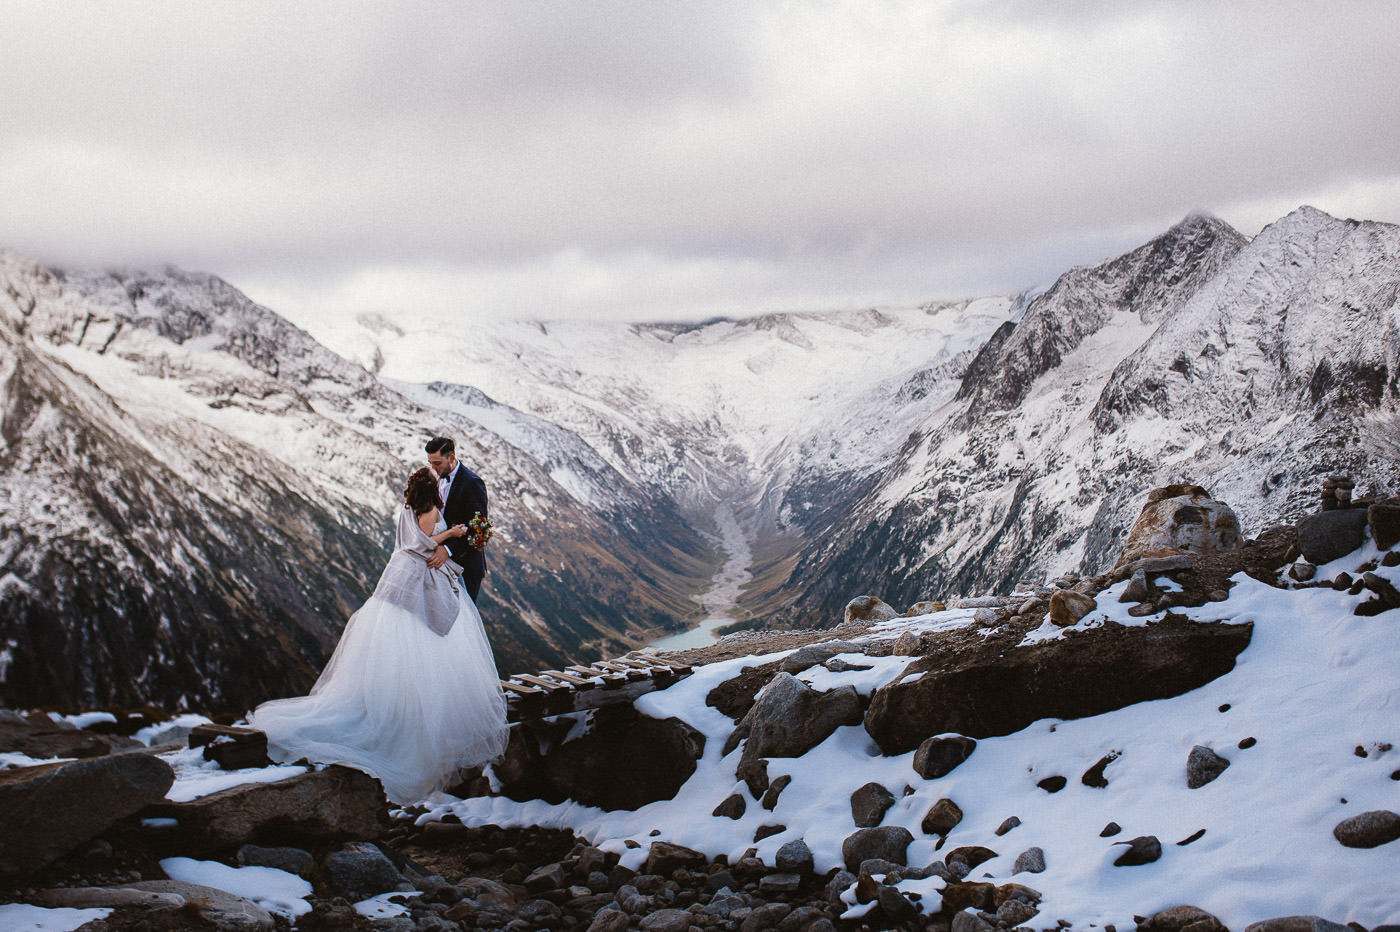 Bridal couple in the mountains, kissing on old wooden bridge with snow